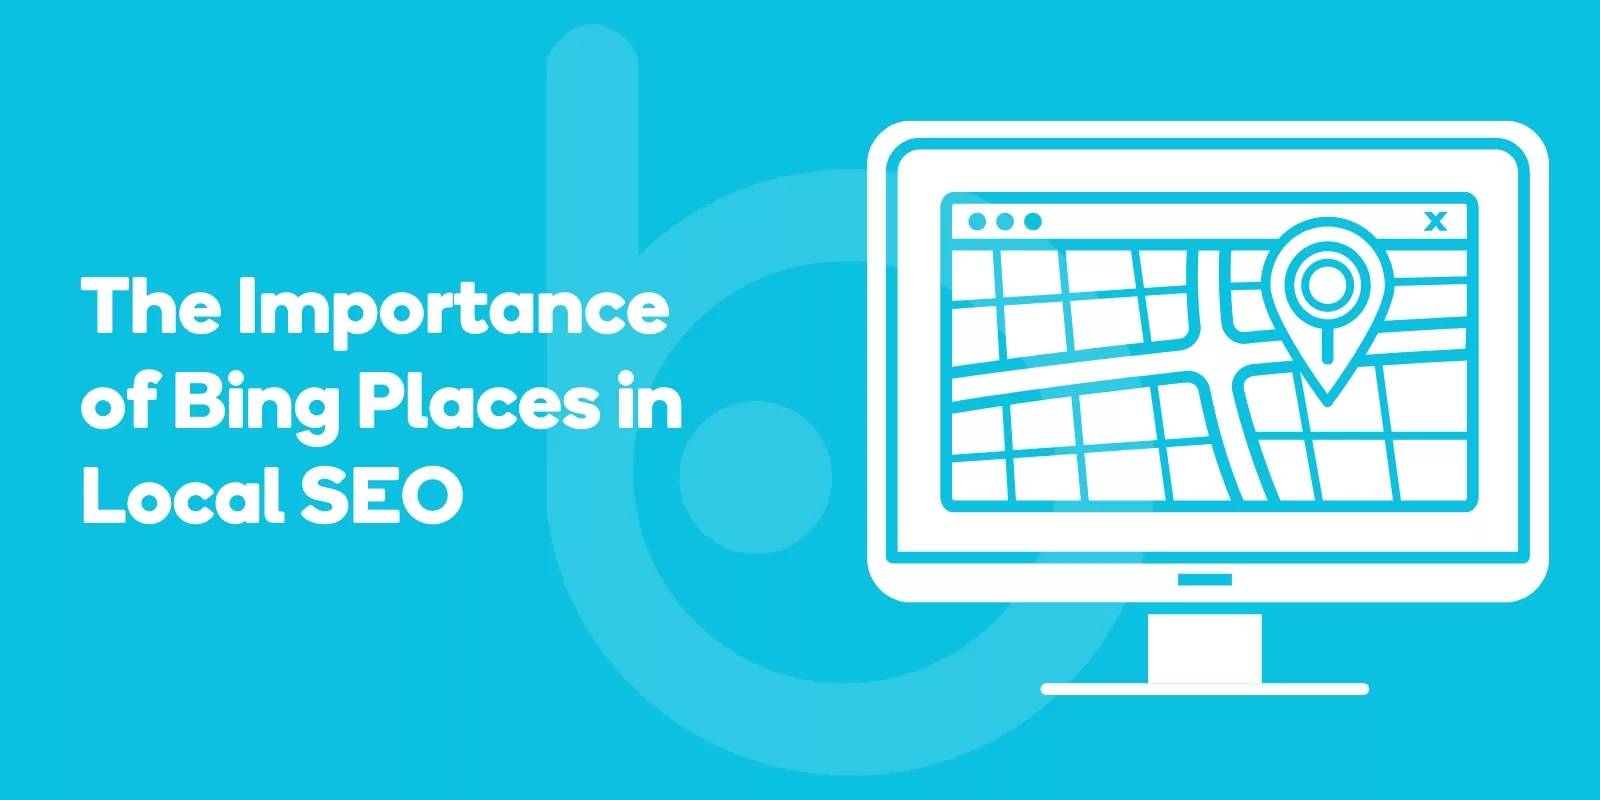 The Importance of Bing Places in Local SEO